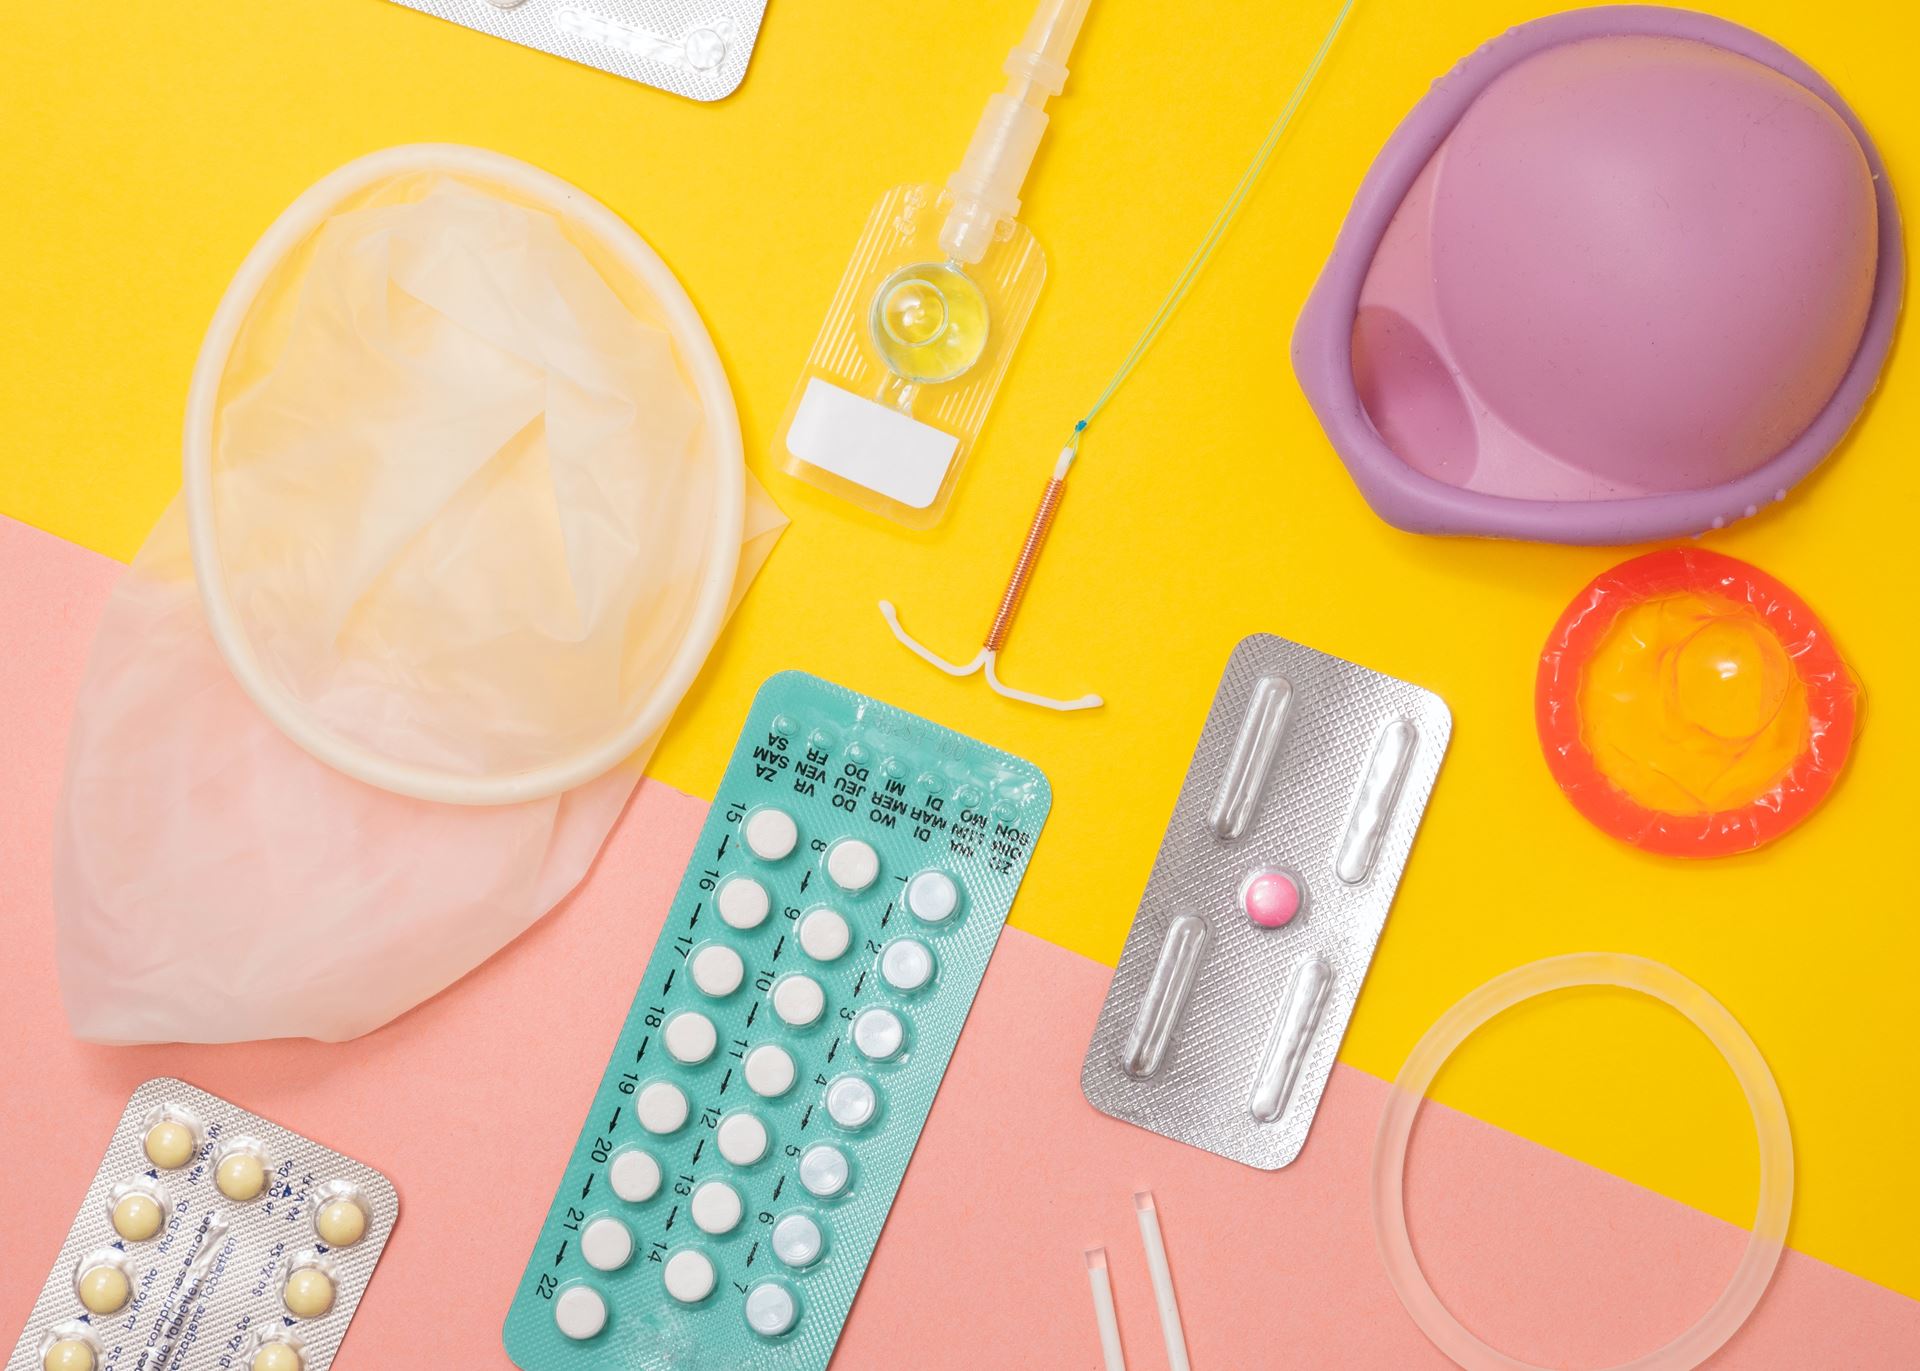 a selection of birth control items on a yellow background